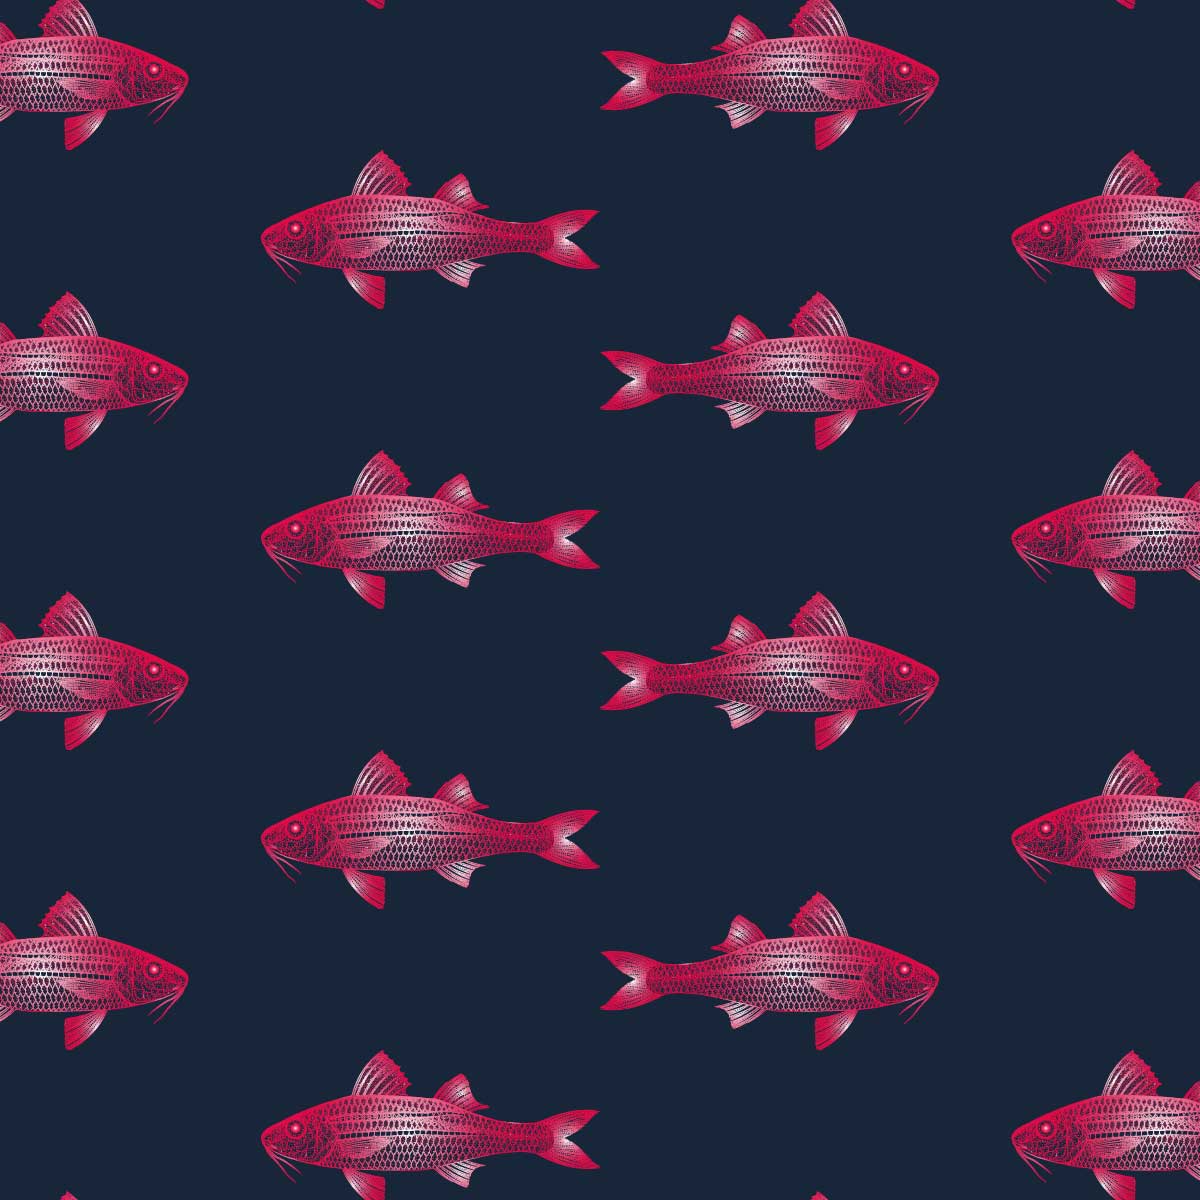 Fish Hand Drawn Seamless Pattern Pro Vector cover image.